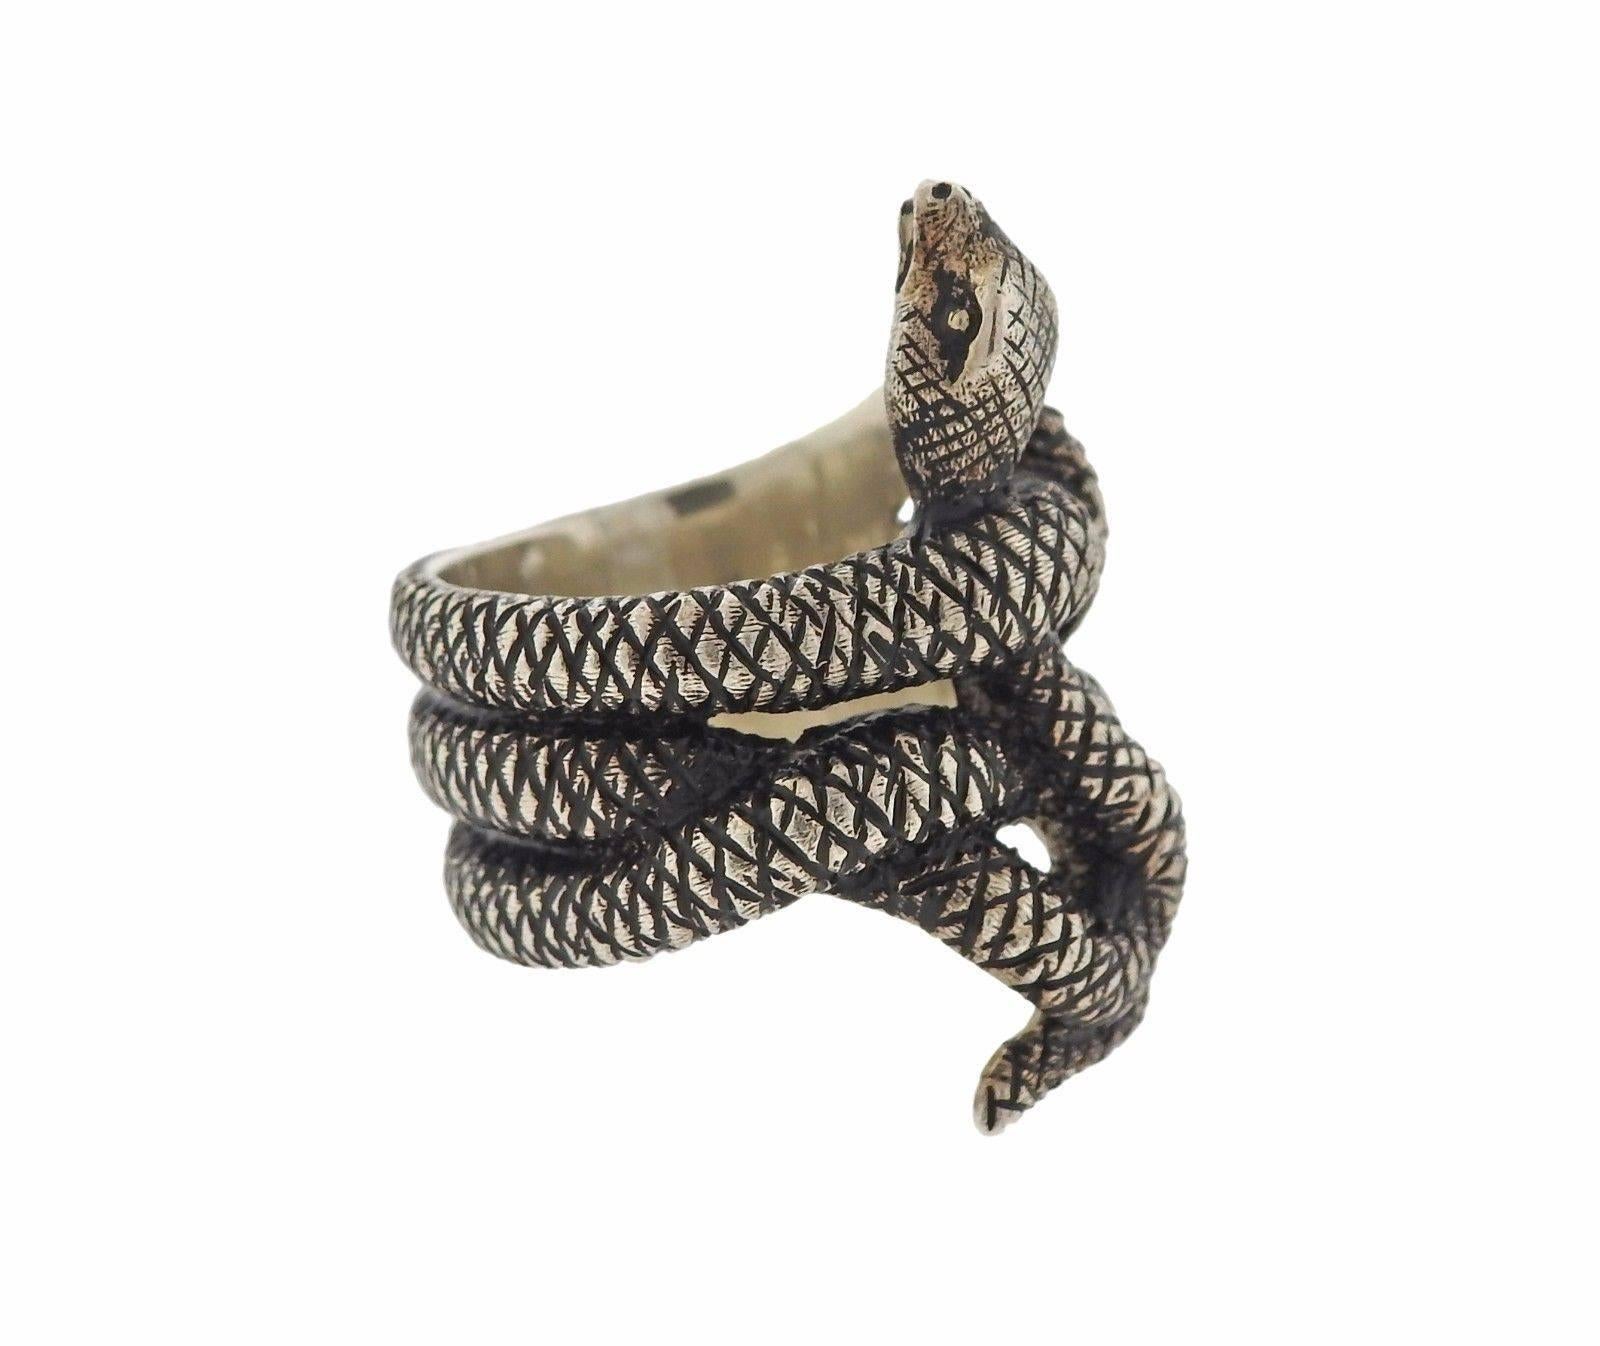 A sterling silver snake ring by Gianmaria Buccellati.  The ring is a size 6 and measures 29mm at the widest point.  The weight of the piece is 16.6 grams.  Marked: 925, Italy, Gianmaria Buccellati. Comes with Buccellati box and paperwork.  Current